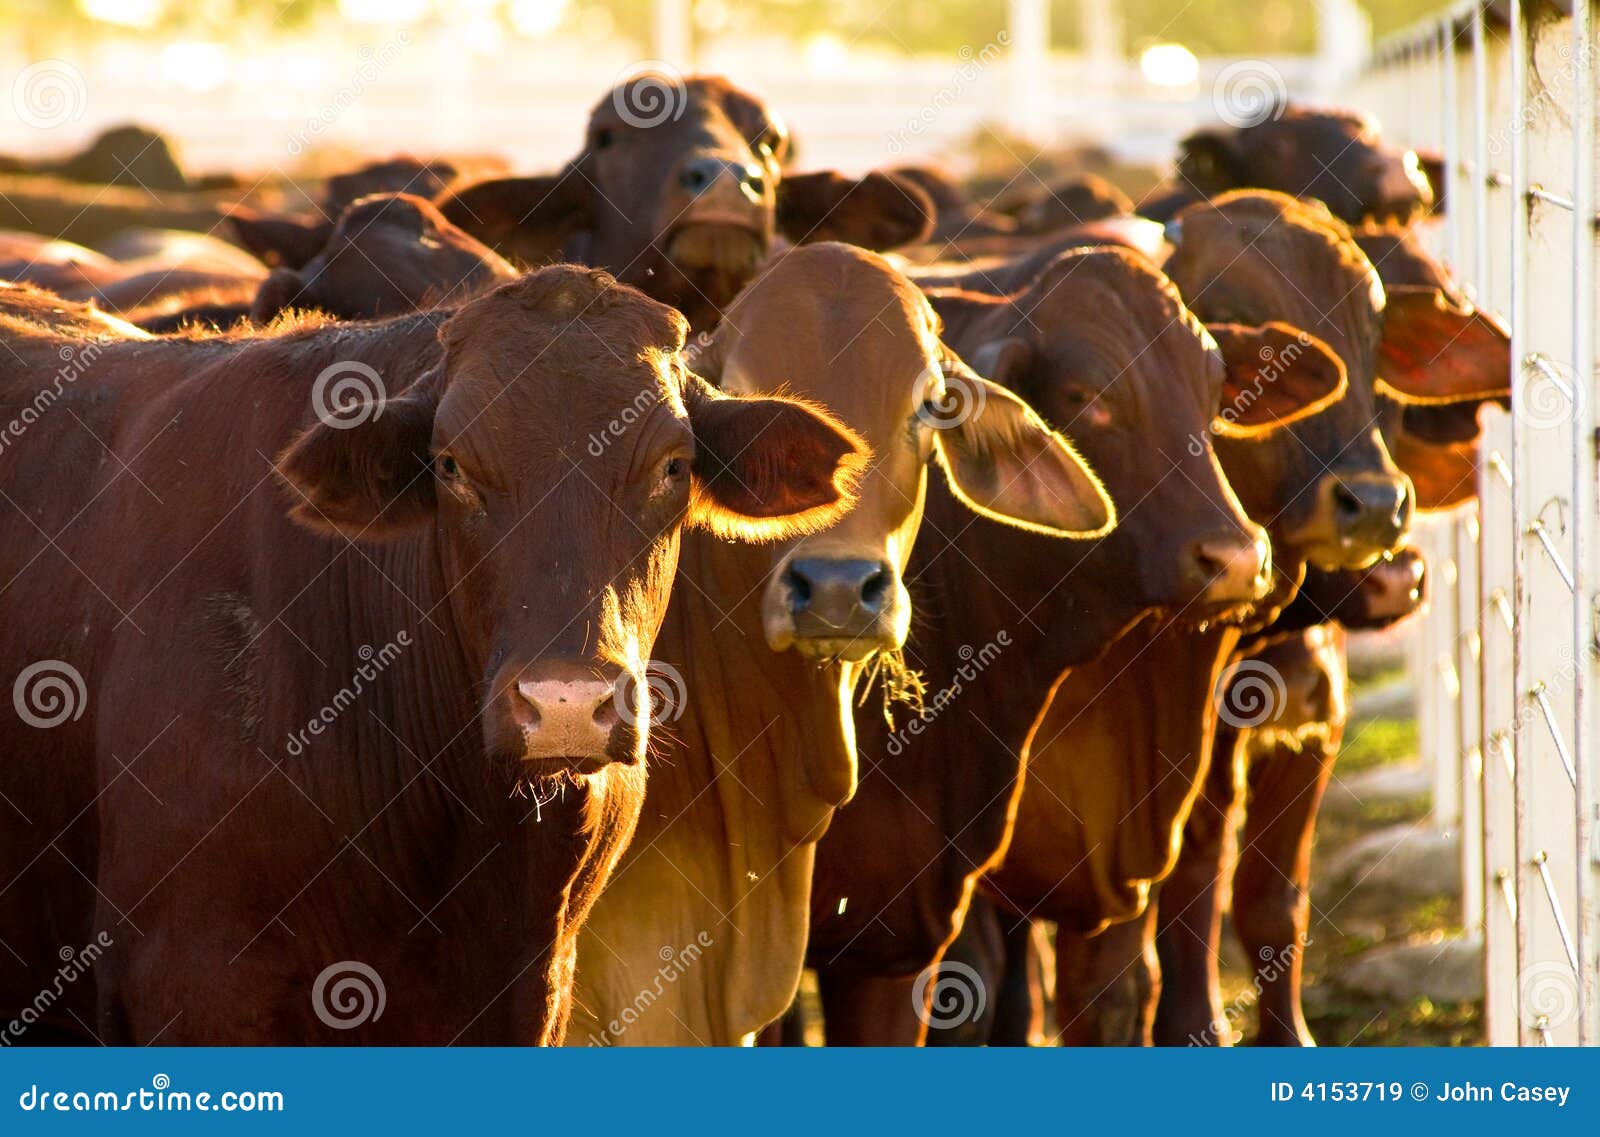 cattle in yards